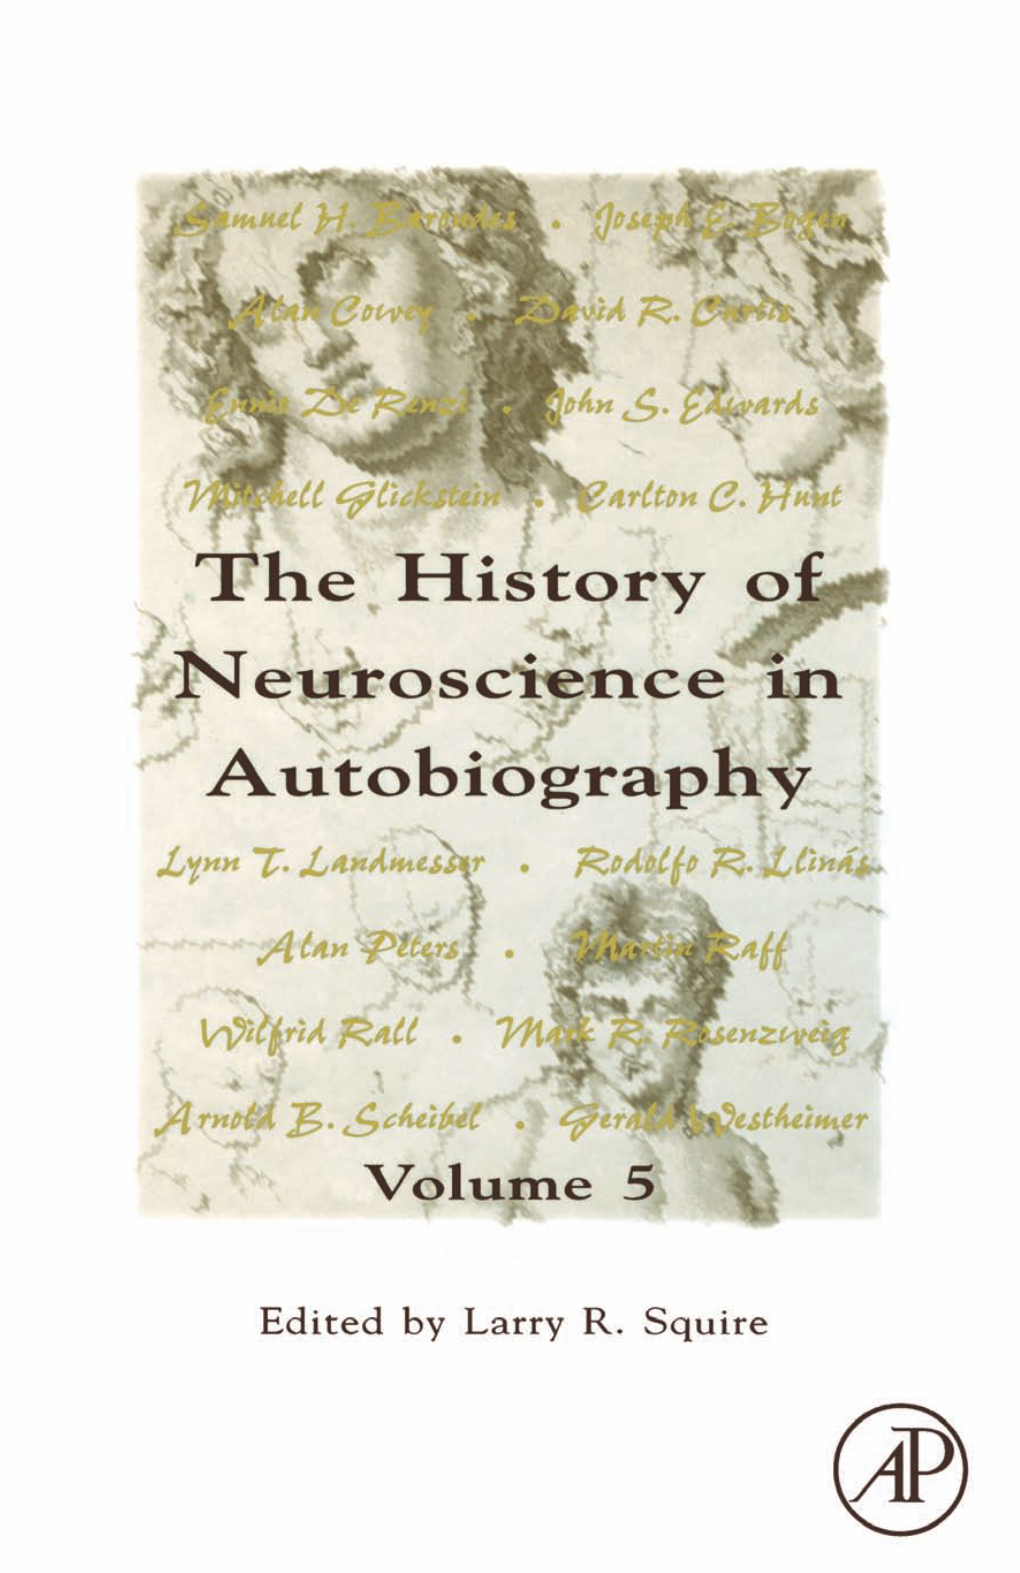 The History of Neuroscience In" Autob~Ograp" by VOLUME 5